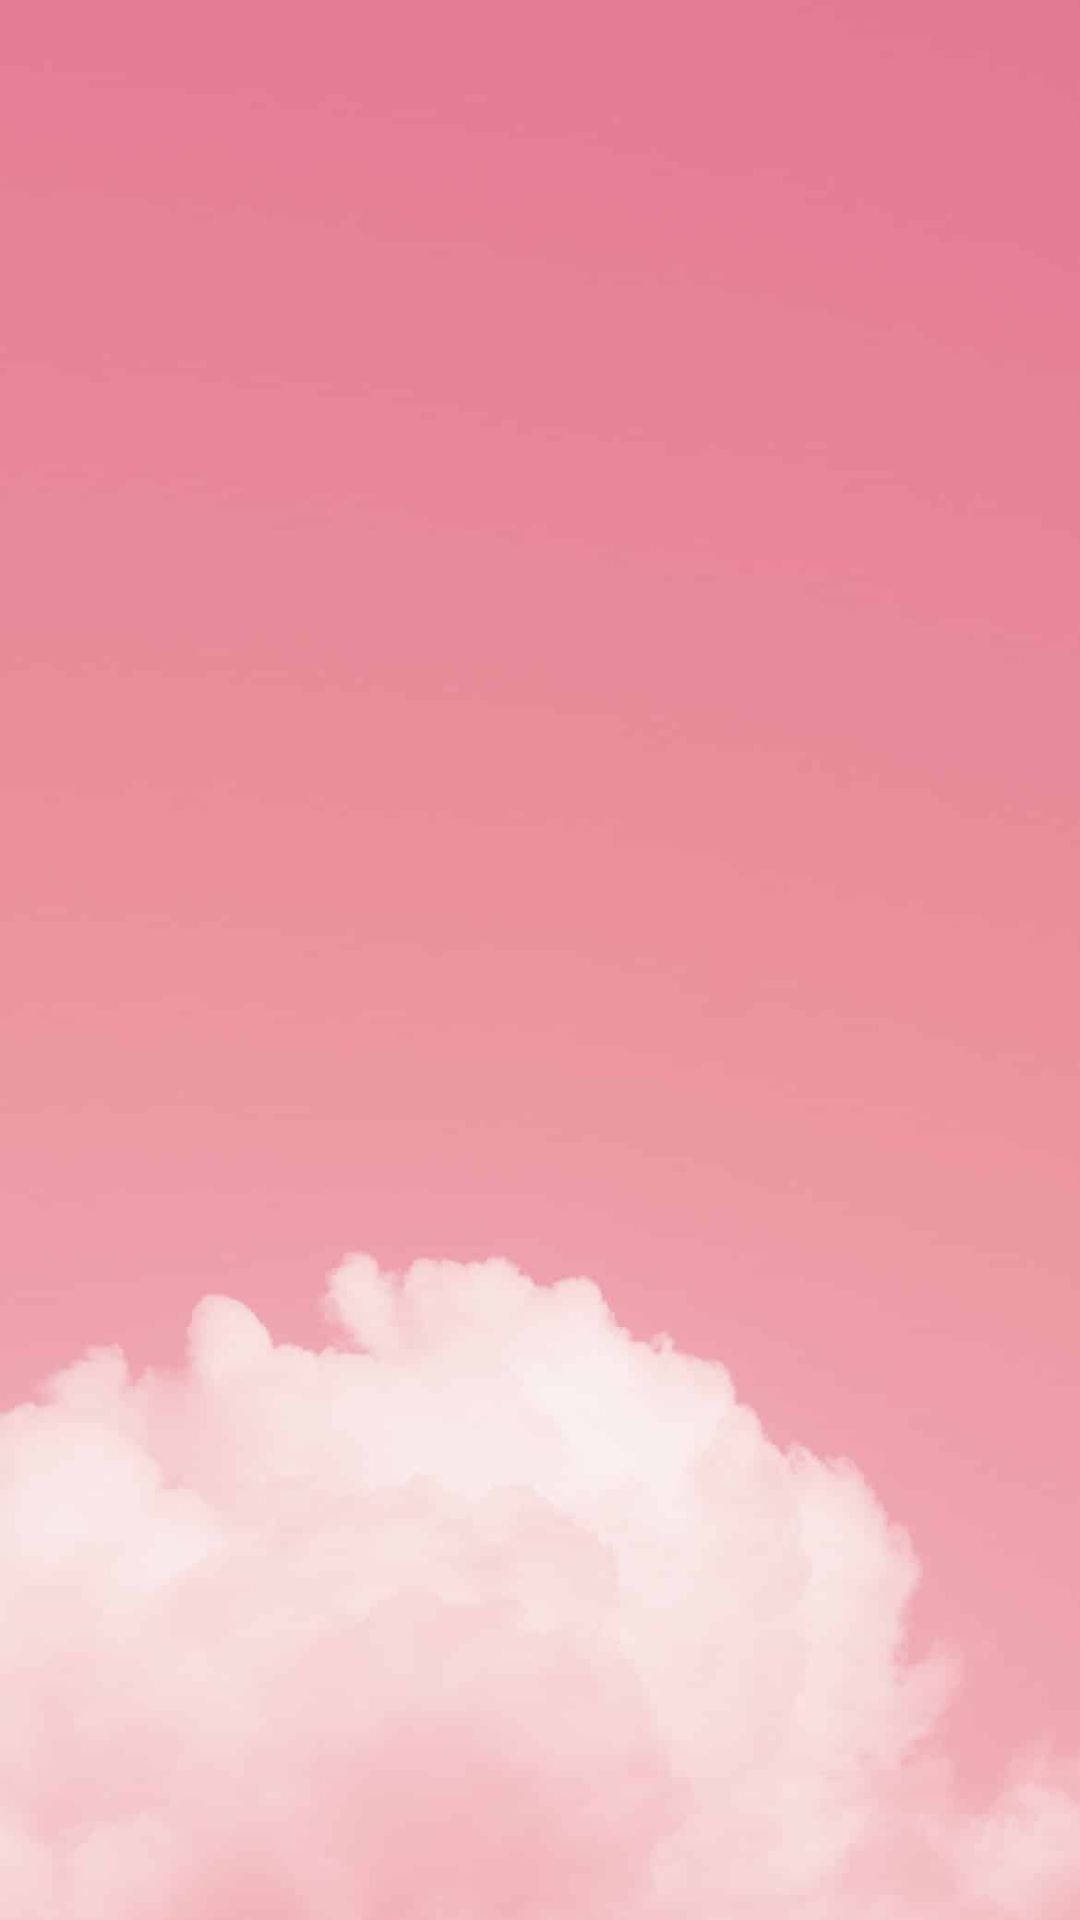 Aesthetic Pink Sky With A Cloud